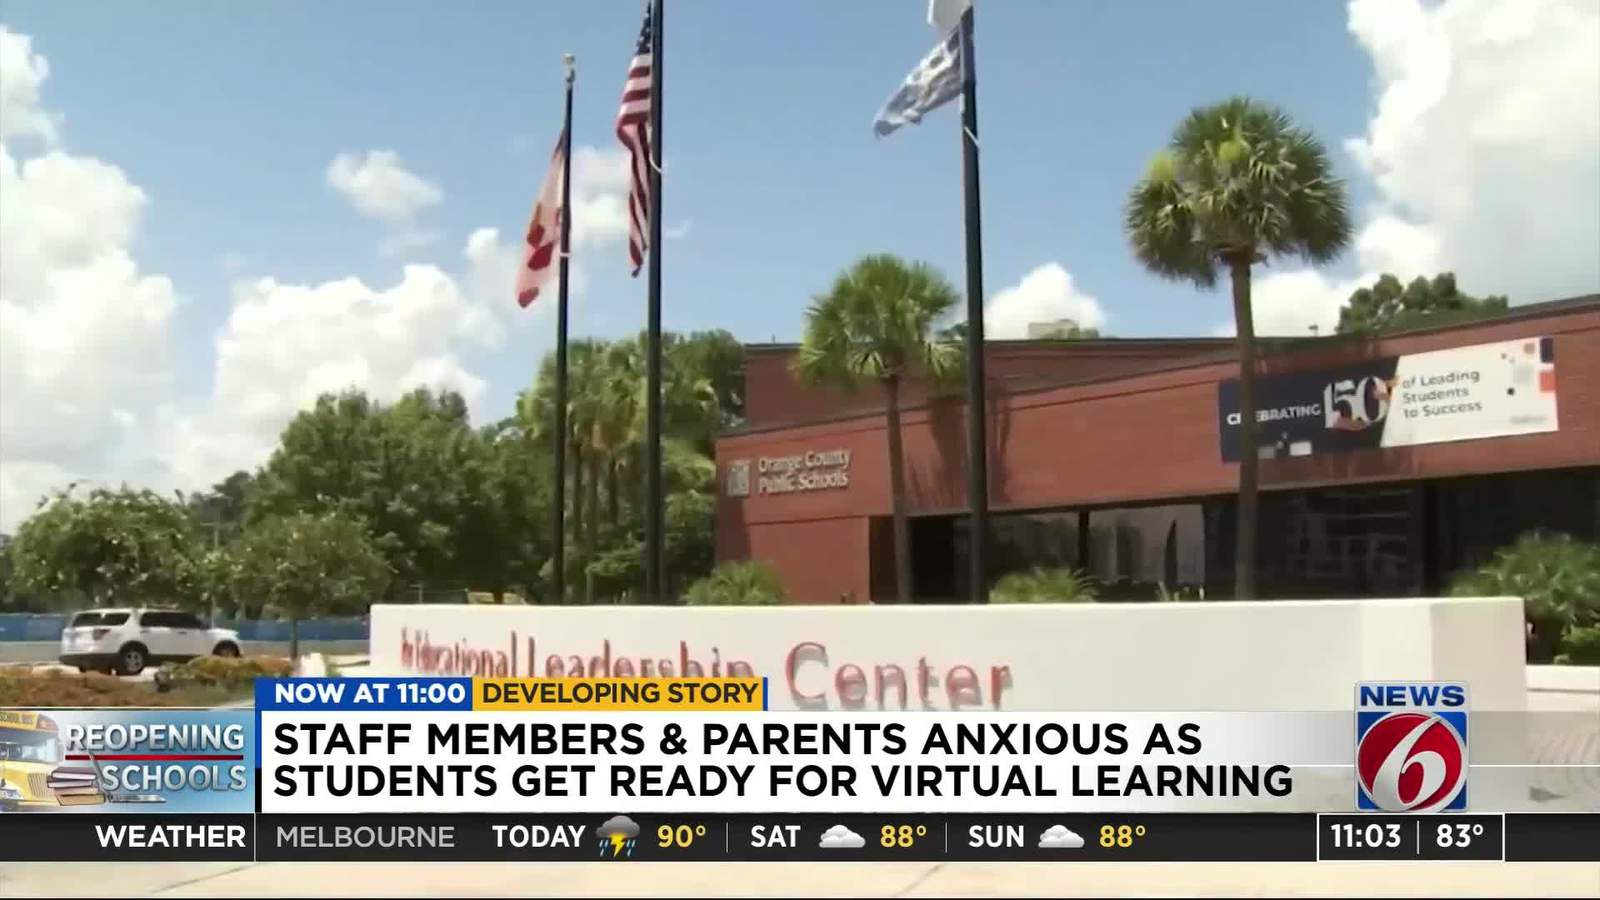 Staff members & parents anxious as students get ready for virtual learning